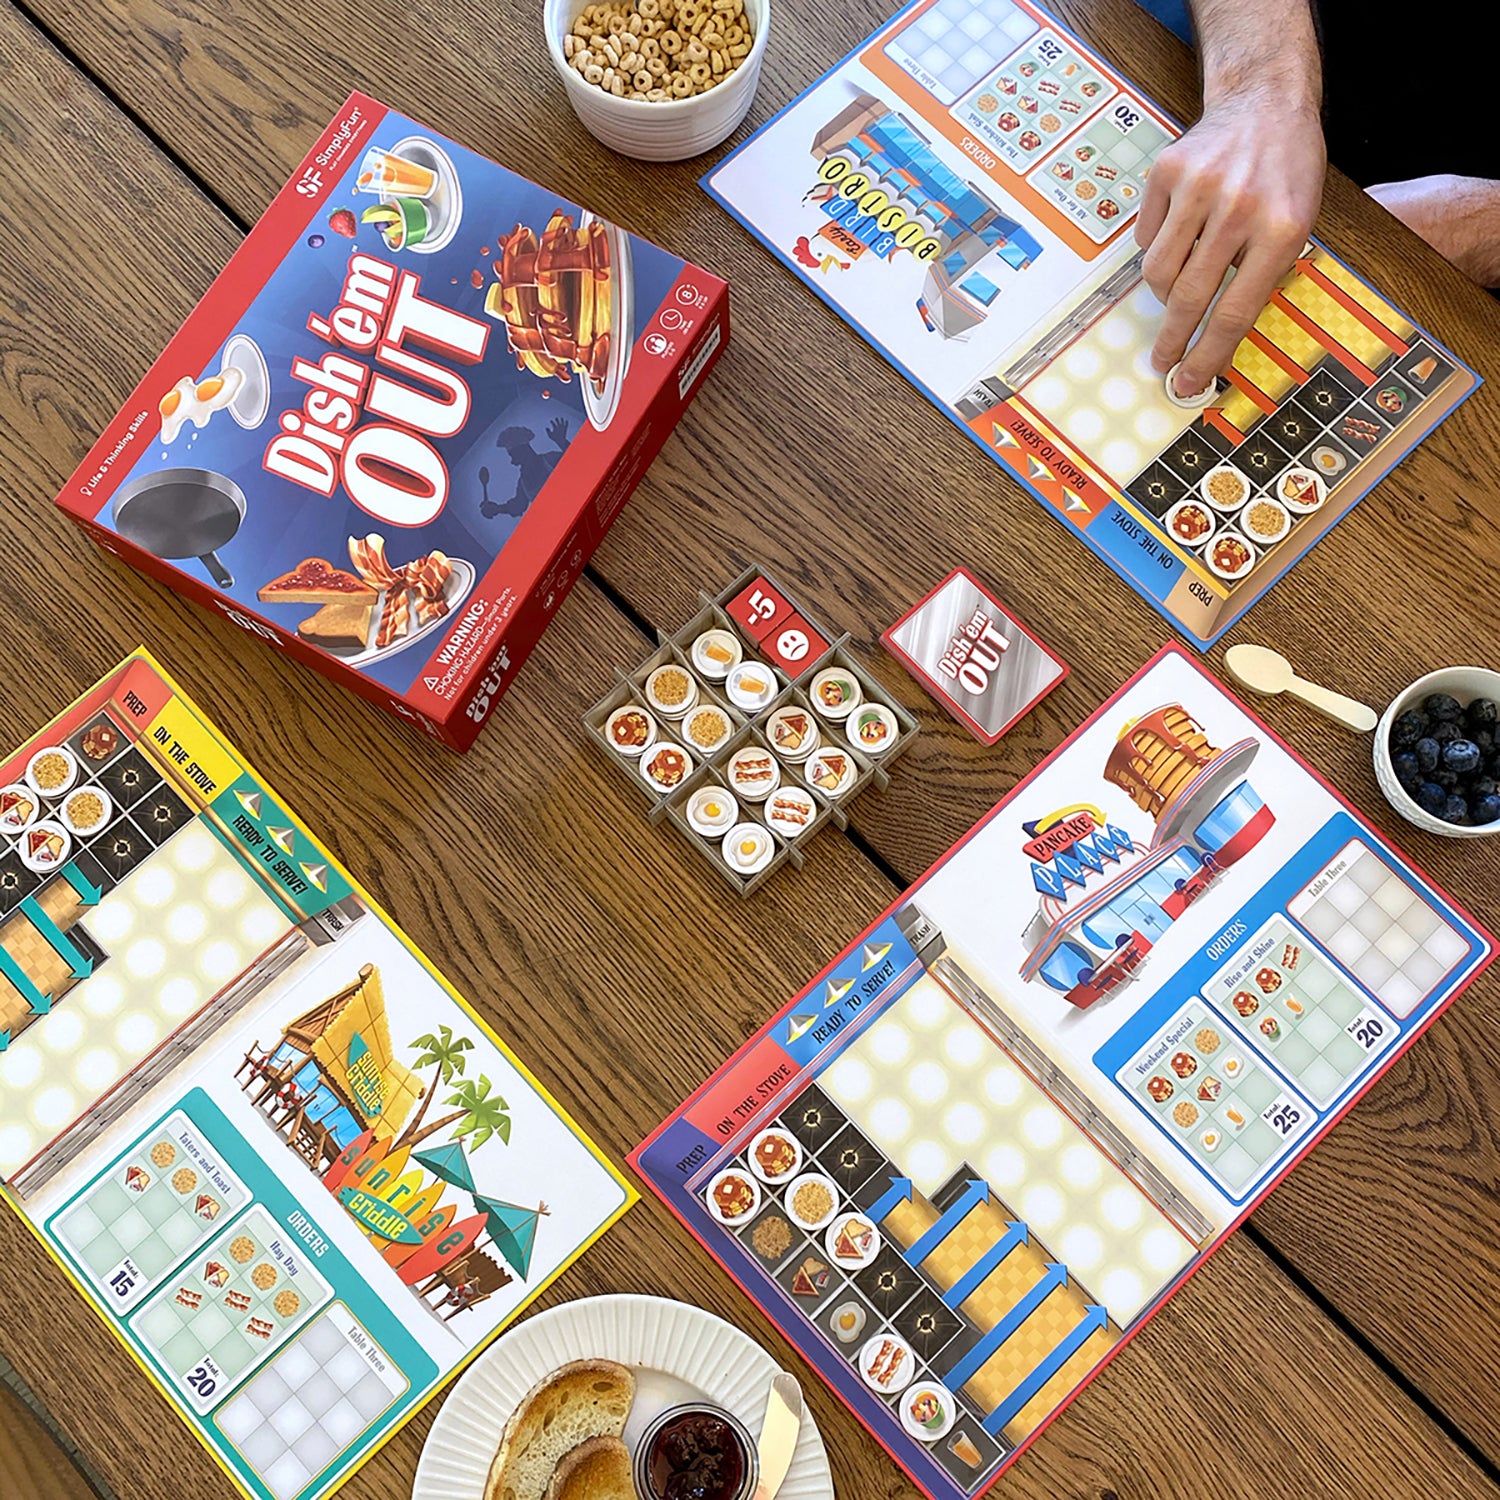 Dish 'em Out: diner-themed strategy board game – SimplyFun